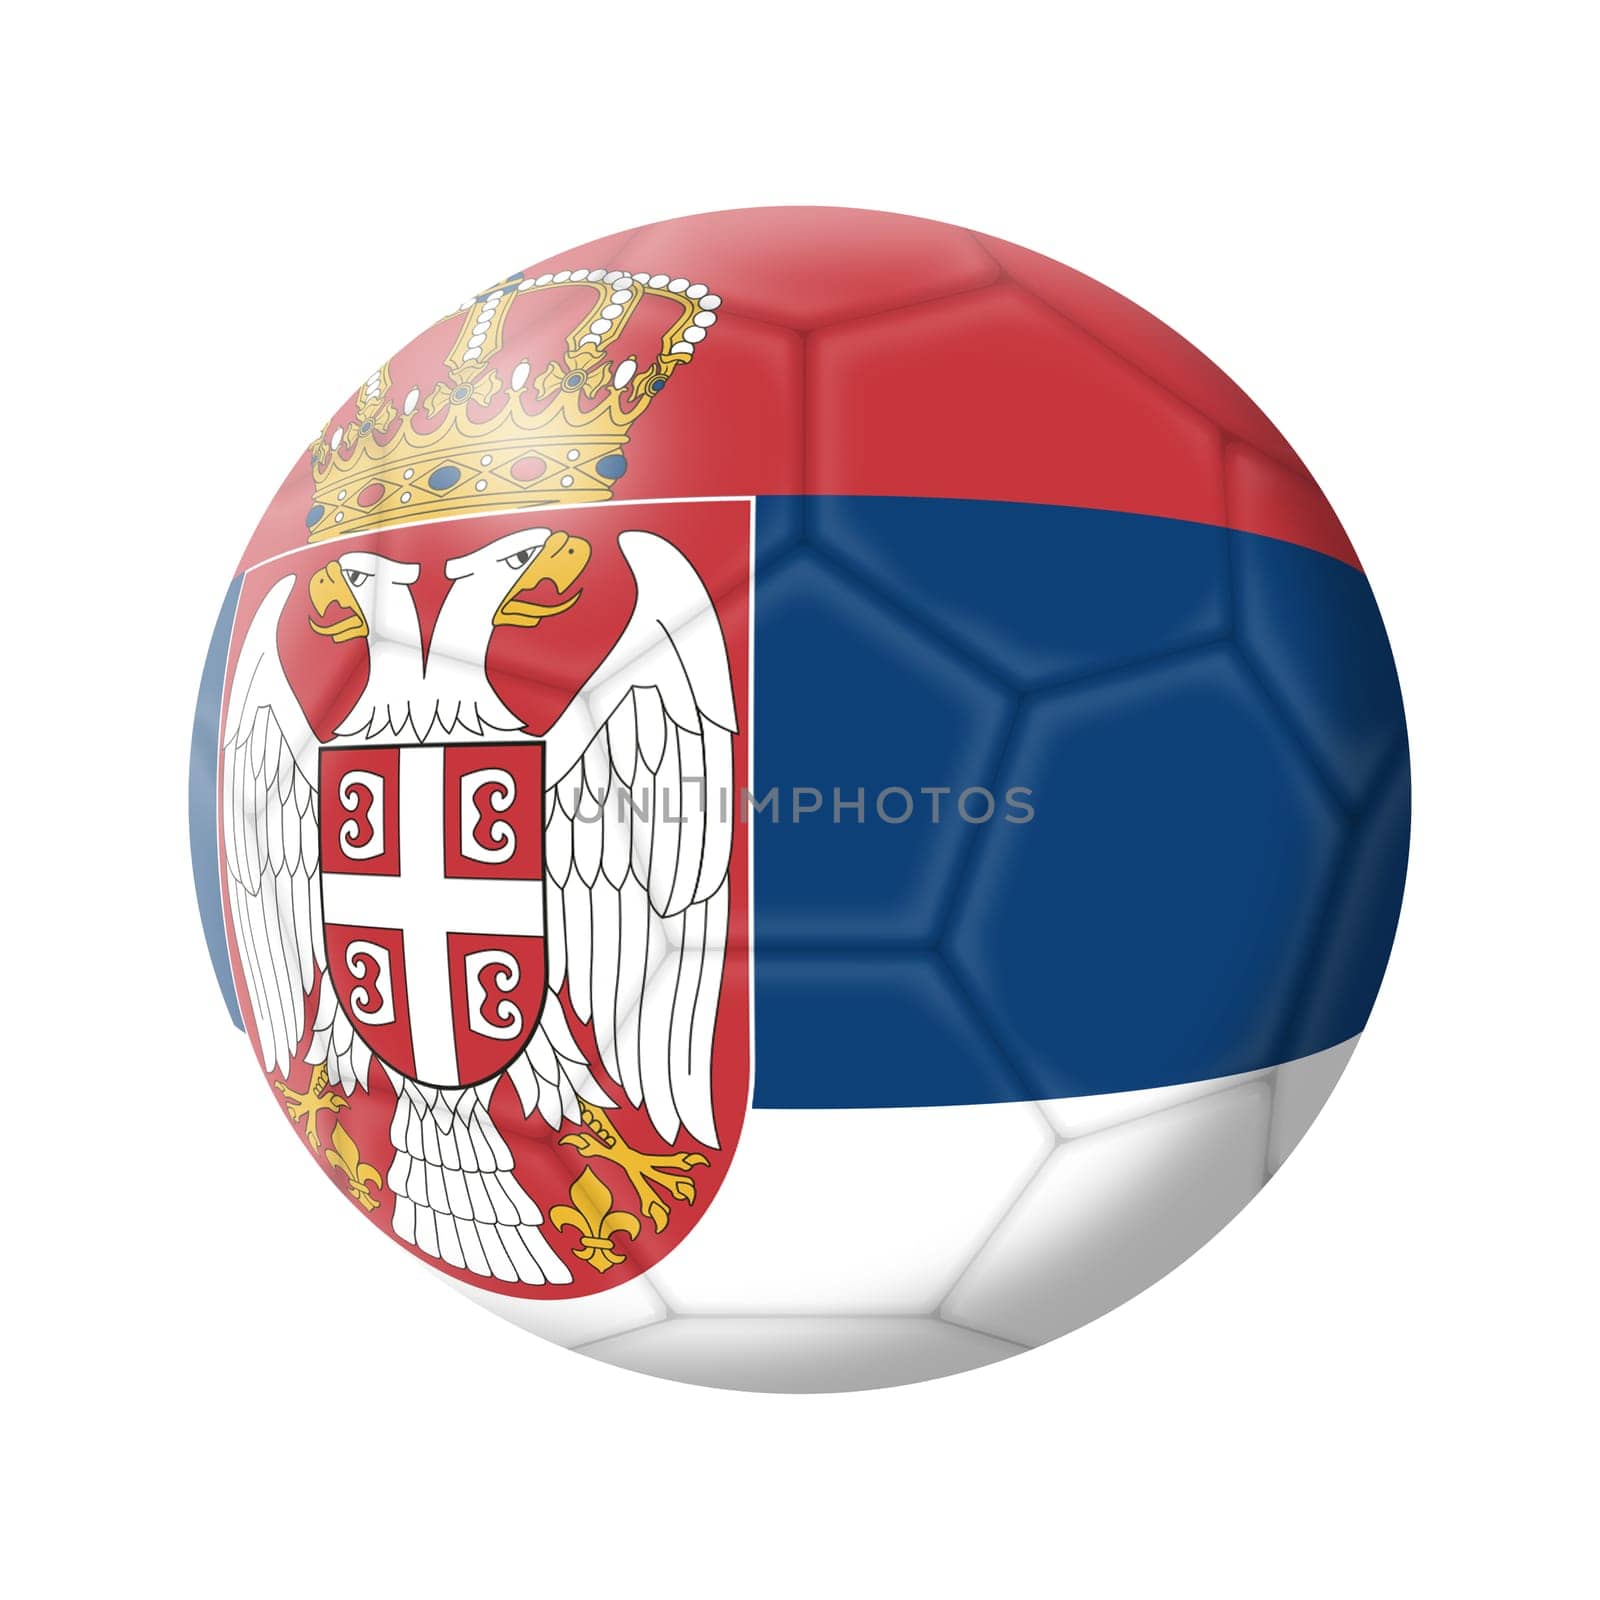 Serbia soccer ball football illustration by VivacityImages